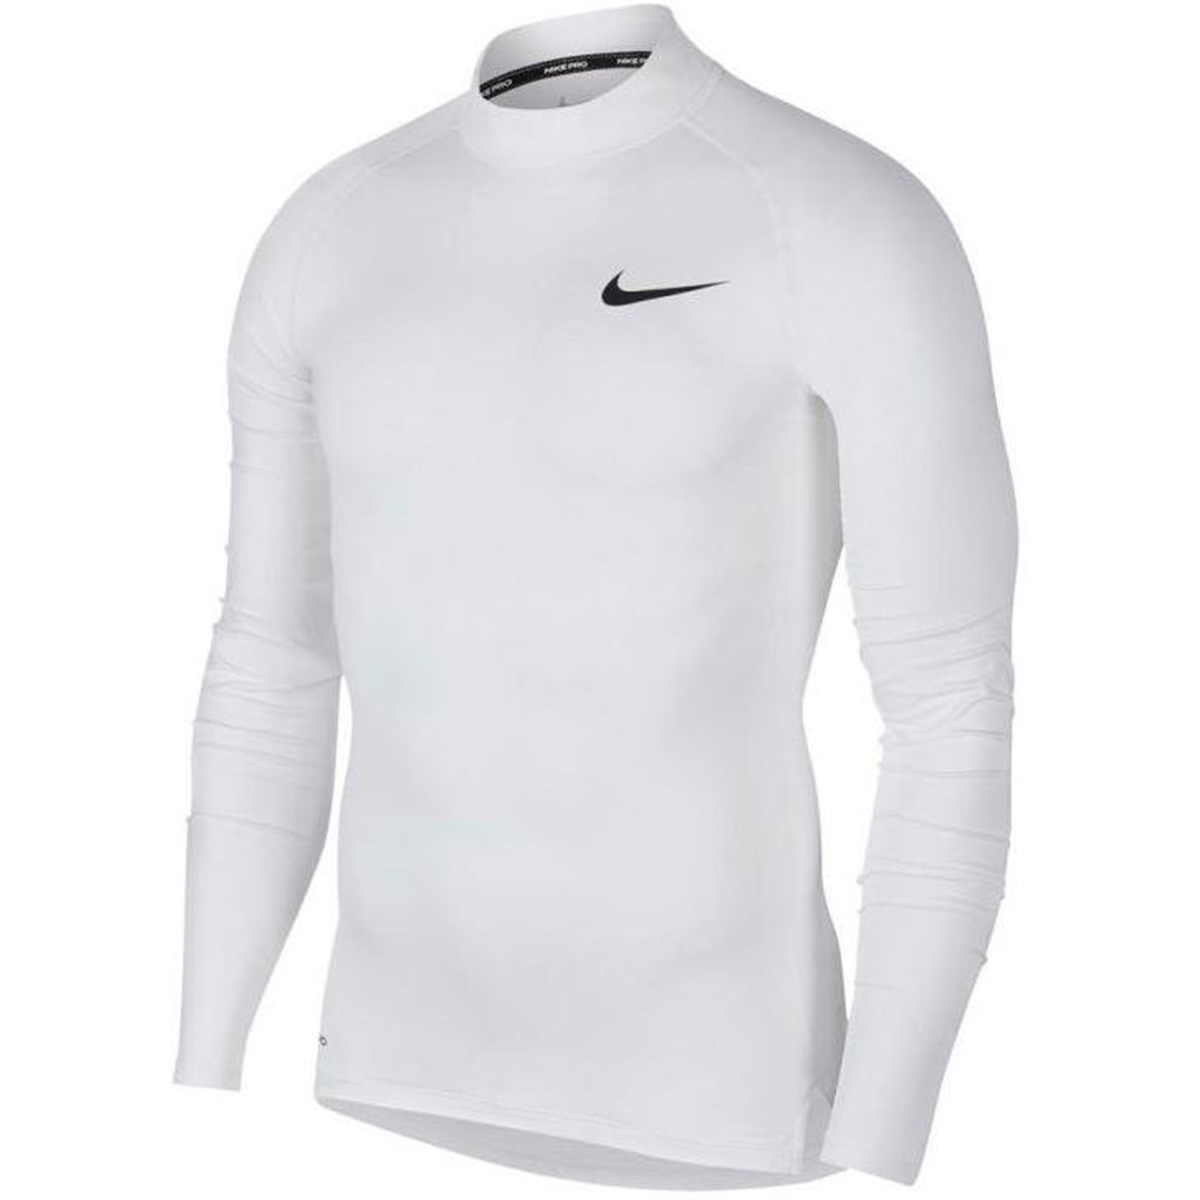 NIKE Herren Pro Dry Fit COMPRESSION Langarm Funktionsshirt weiss